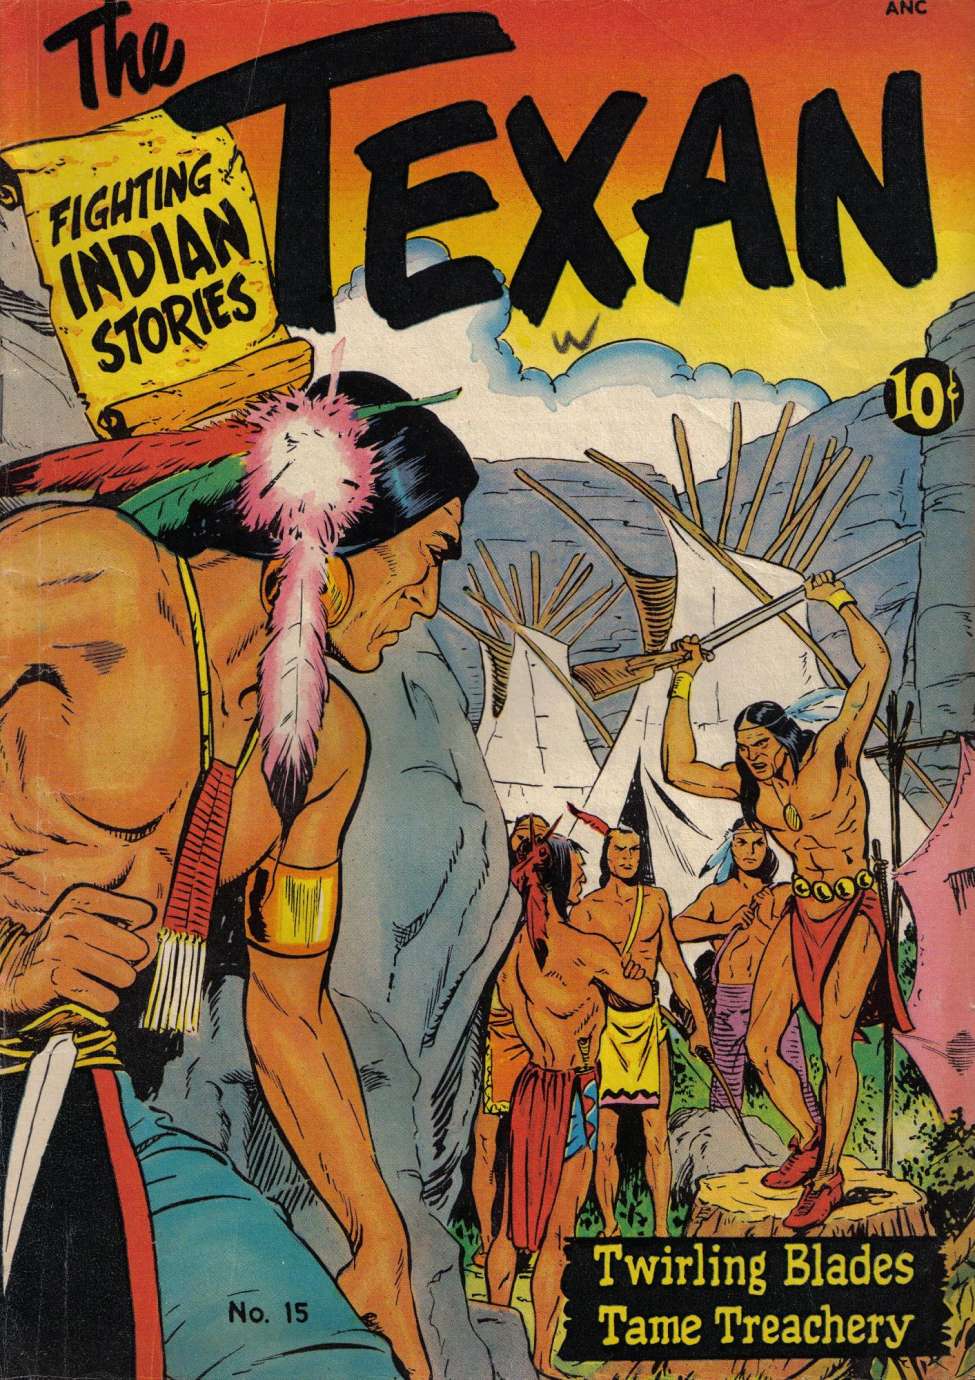 Book Cover For The Texan 15